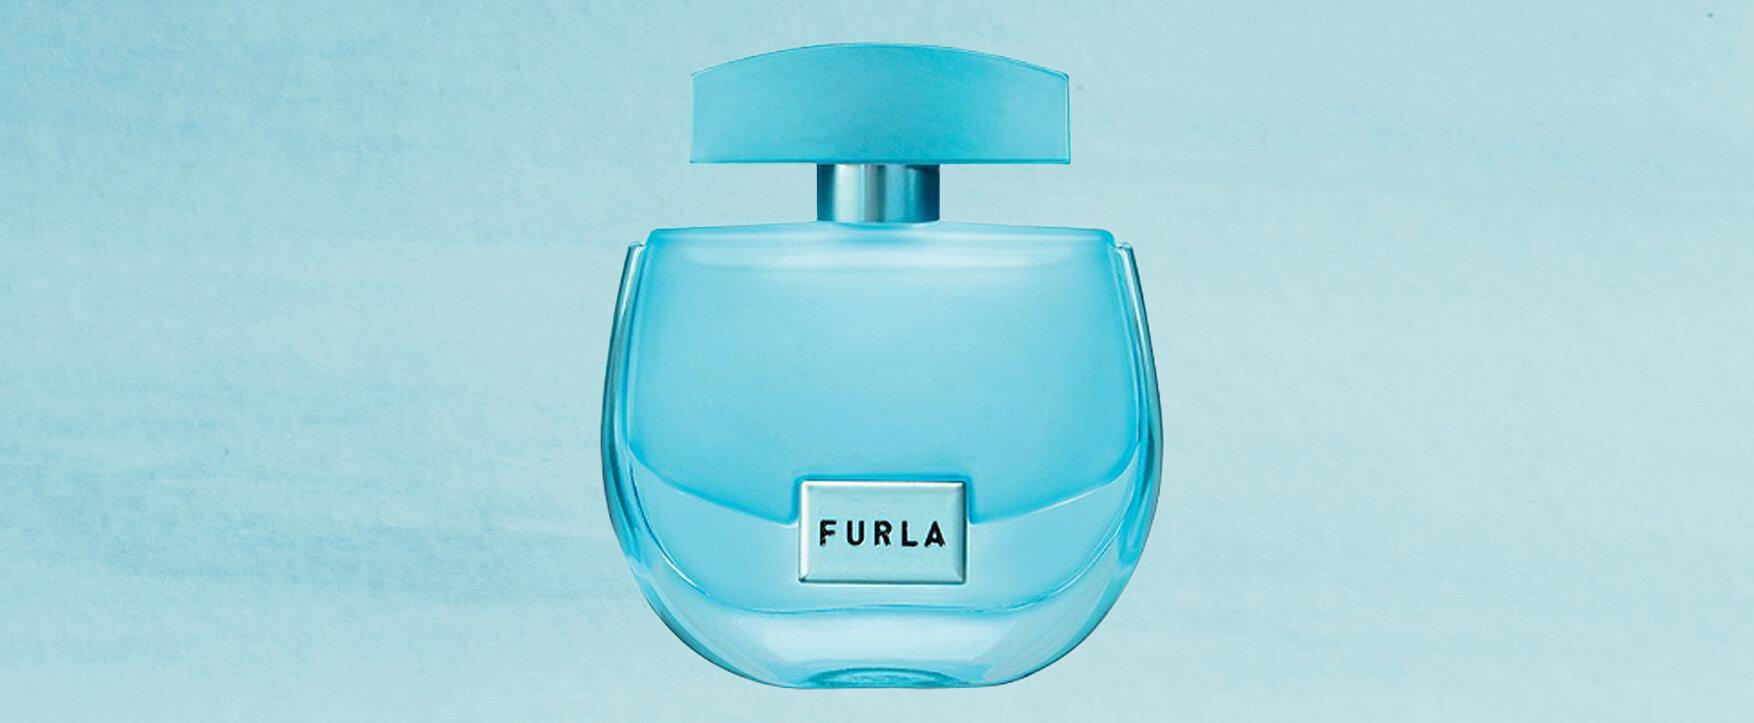 “Unica” - New Perfume by Furla With an Accord of Pistachio and Salt